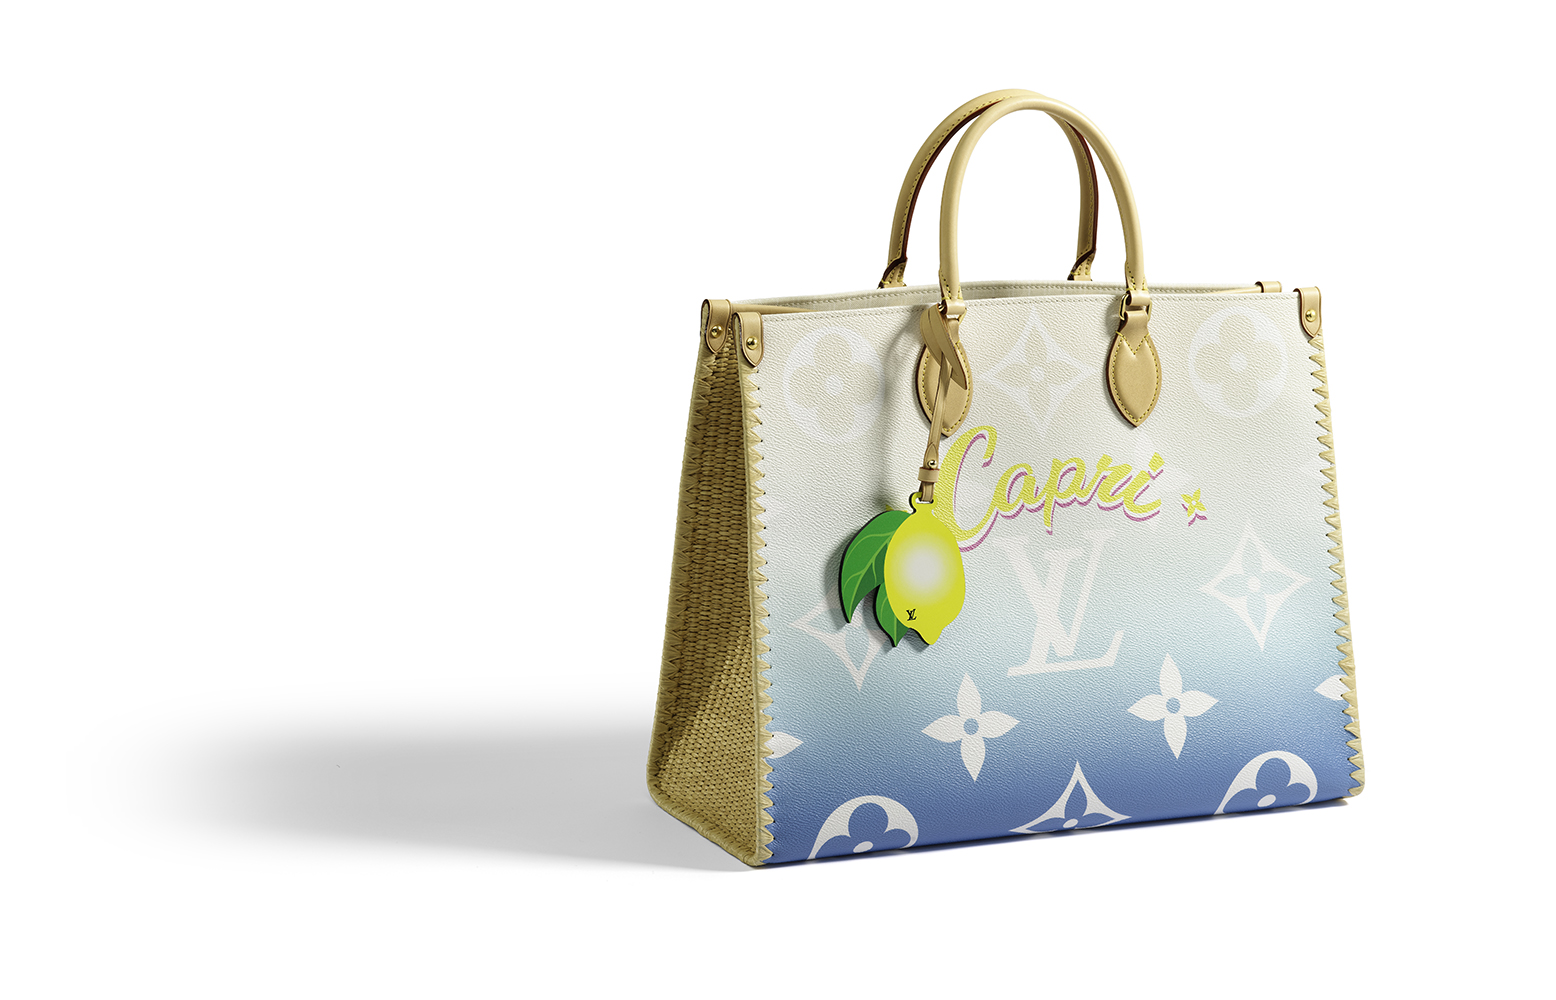 Top 5 Tote Bags for Work, Rest & Play - Vestiaire Collective